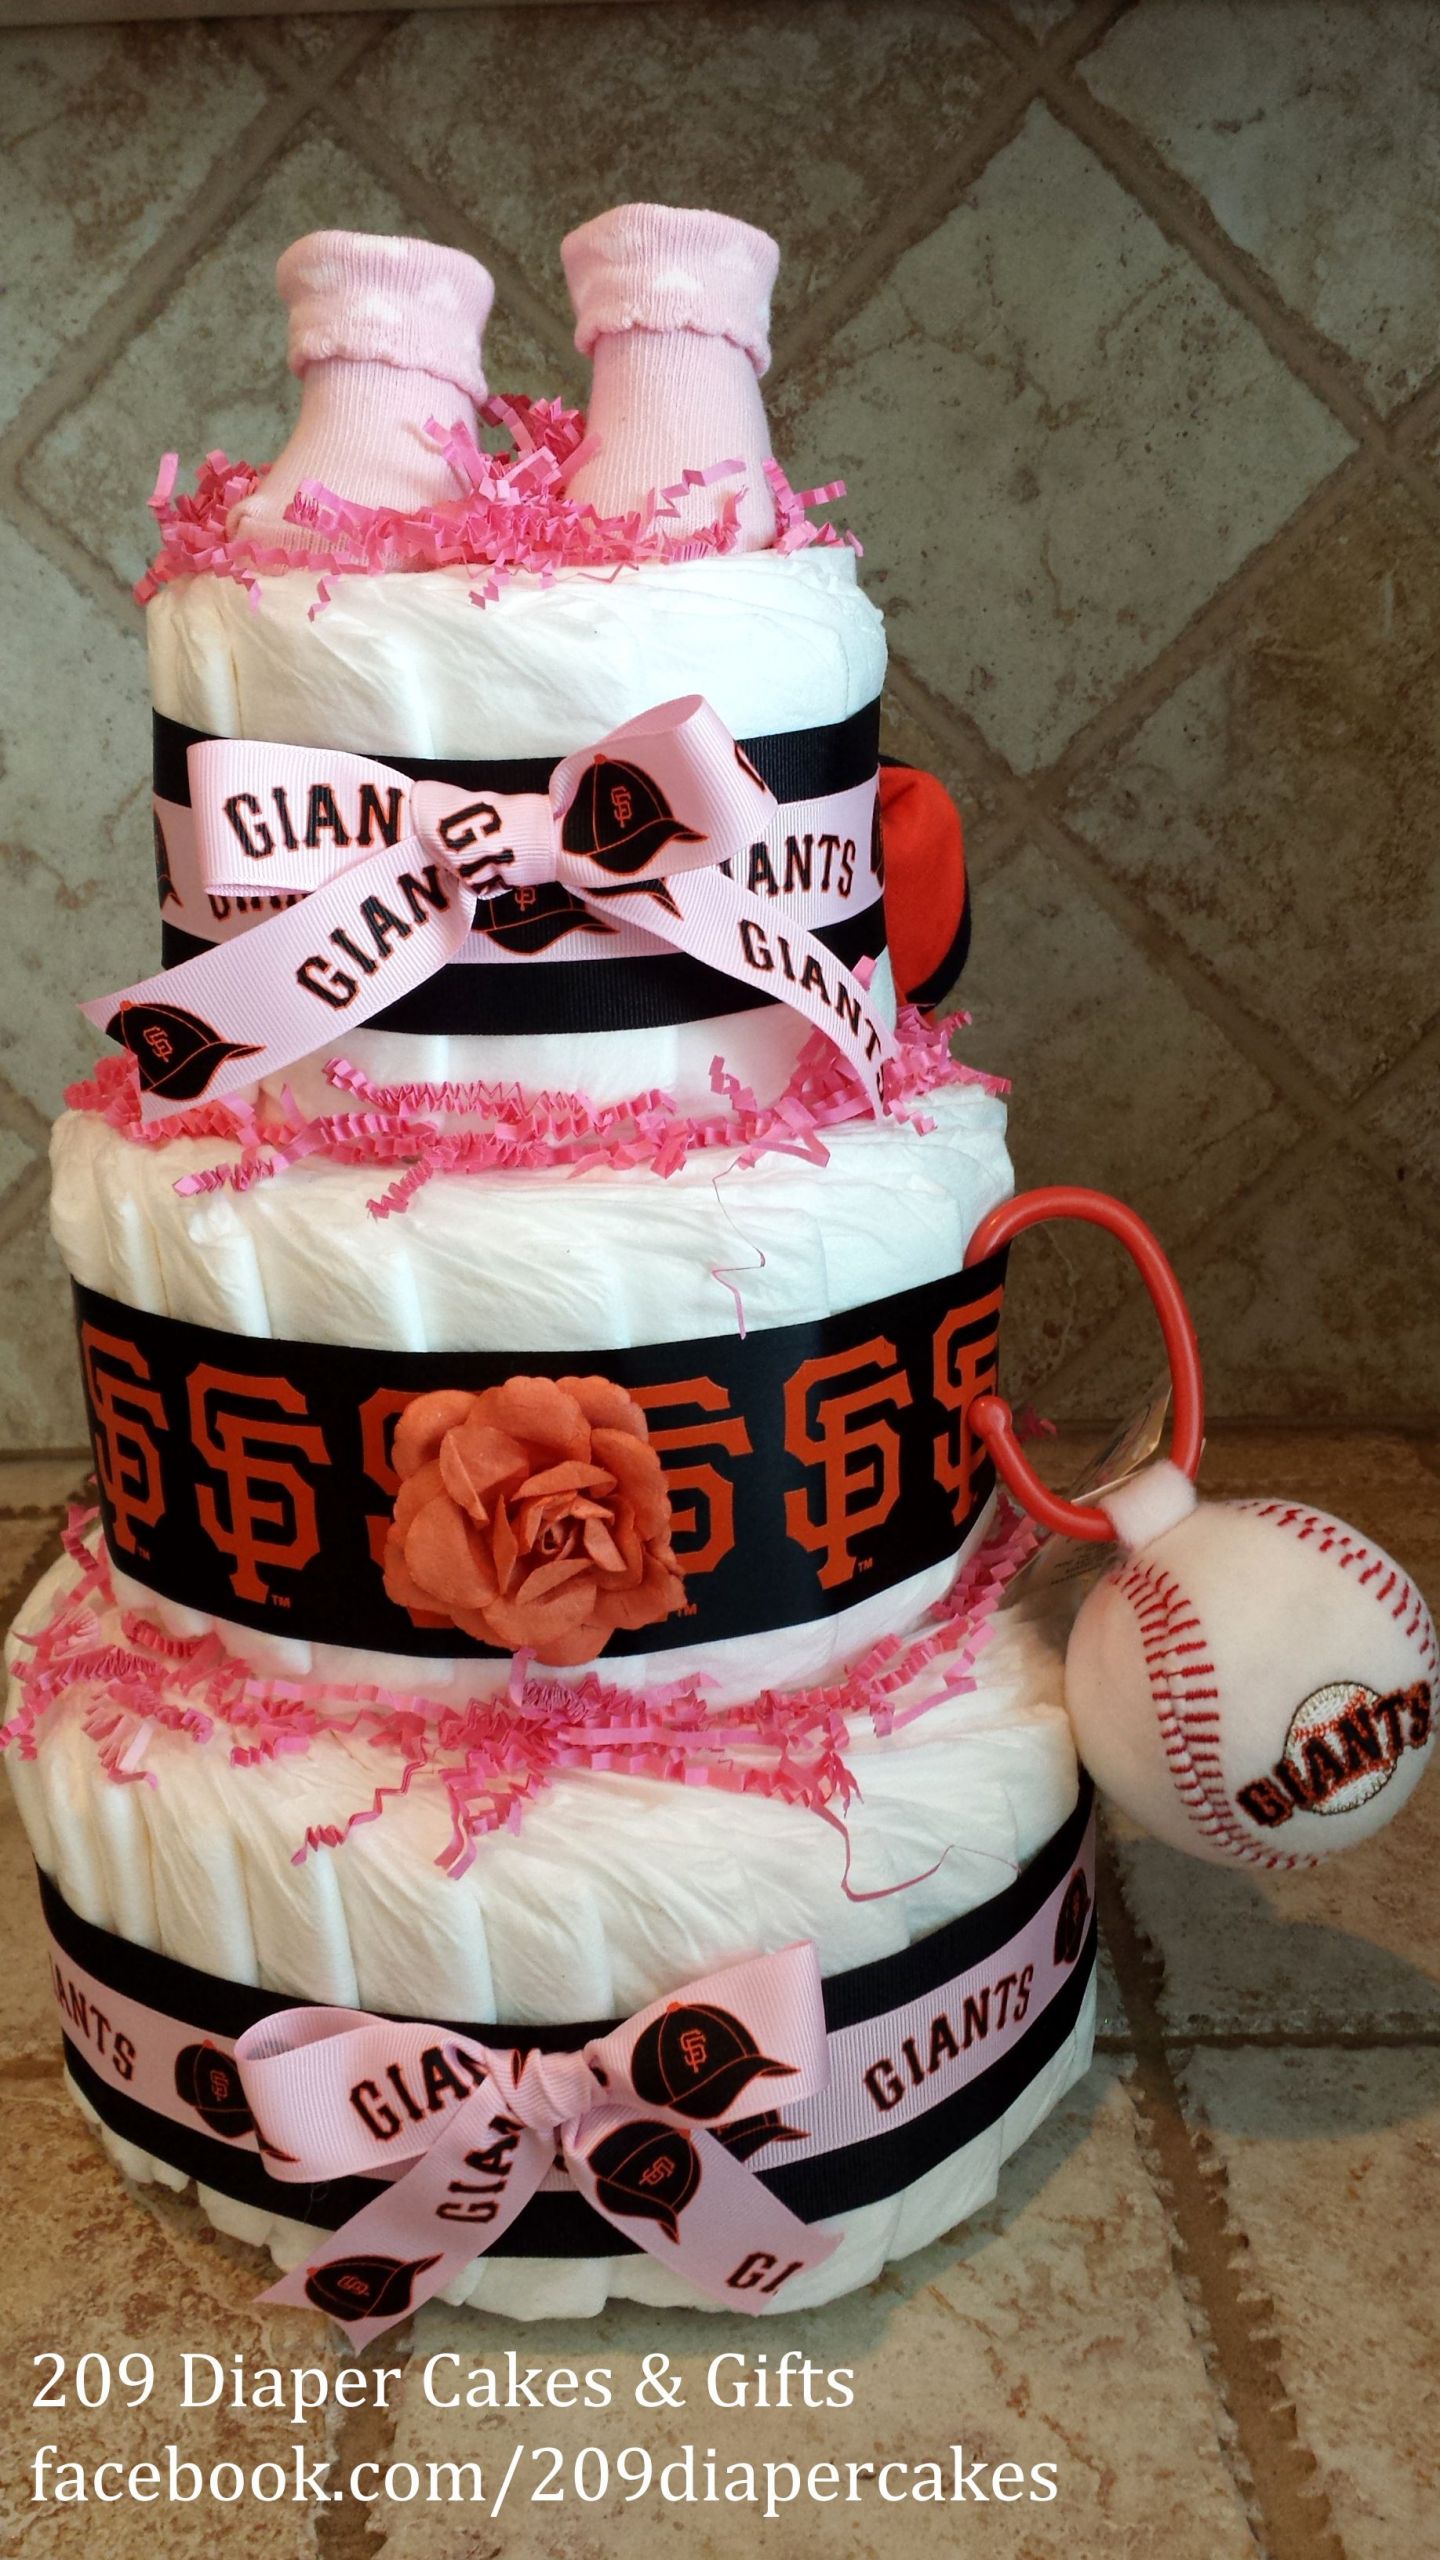 Baby Gift San Francisco
 Pink Baby Girl San Francisco Giants Diaper Cake by 209